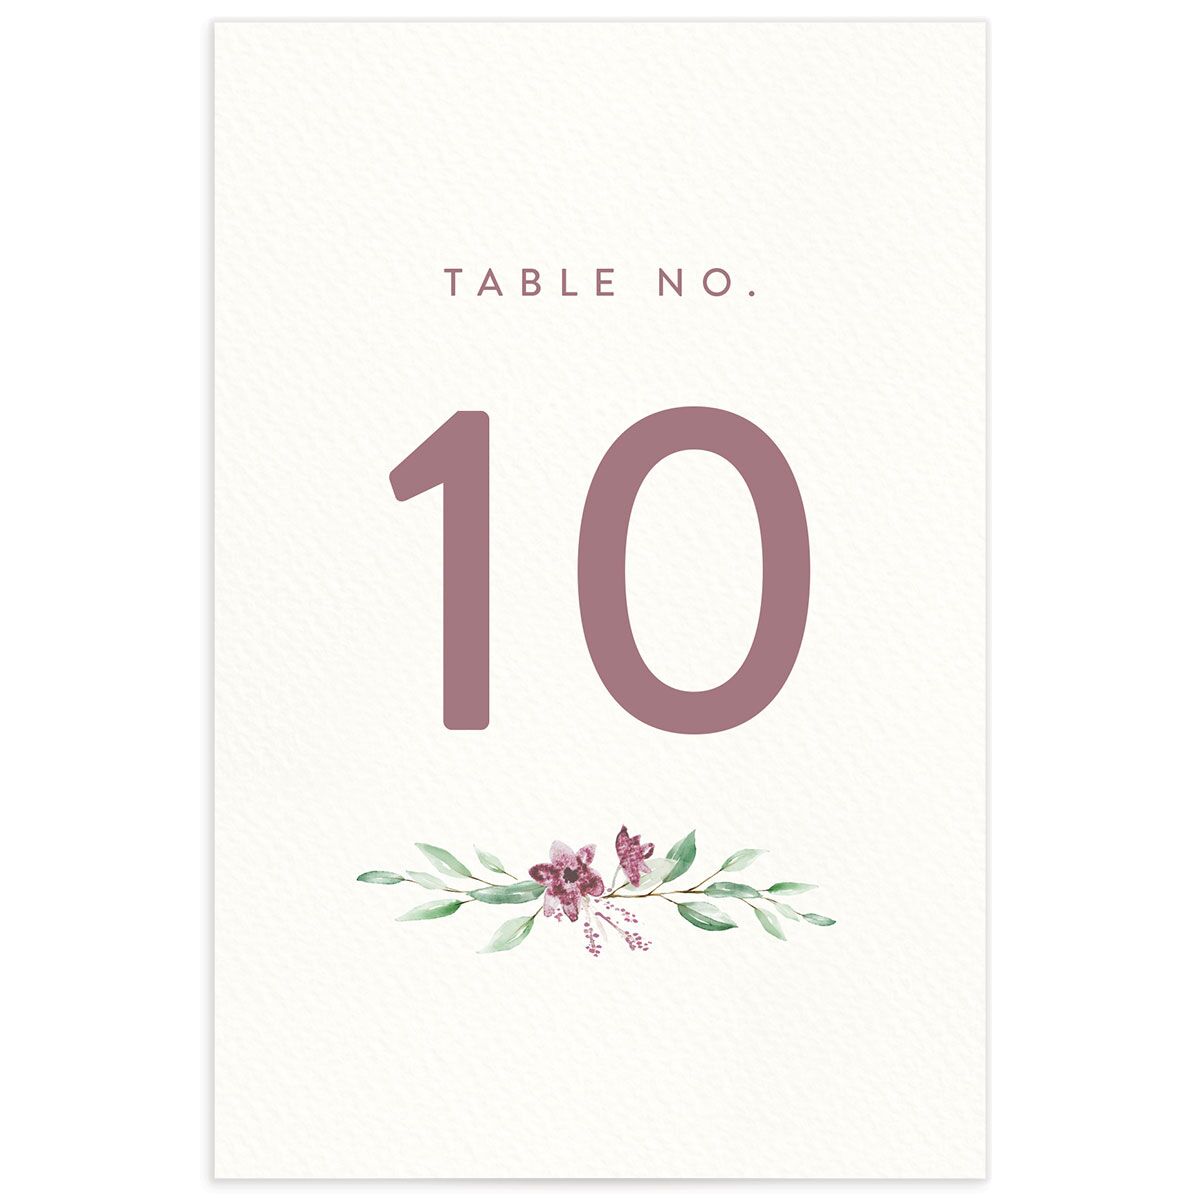 Rustic Emblem Table Numbers back in Rose Pink